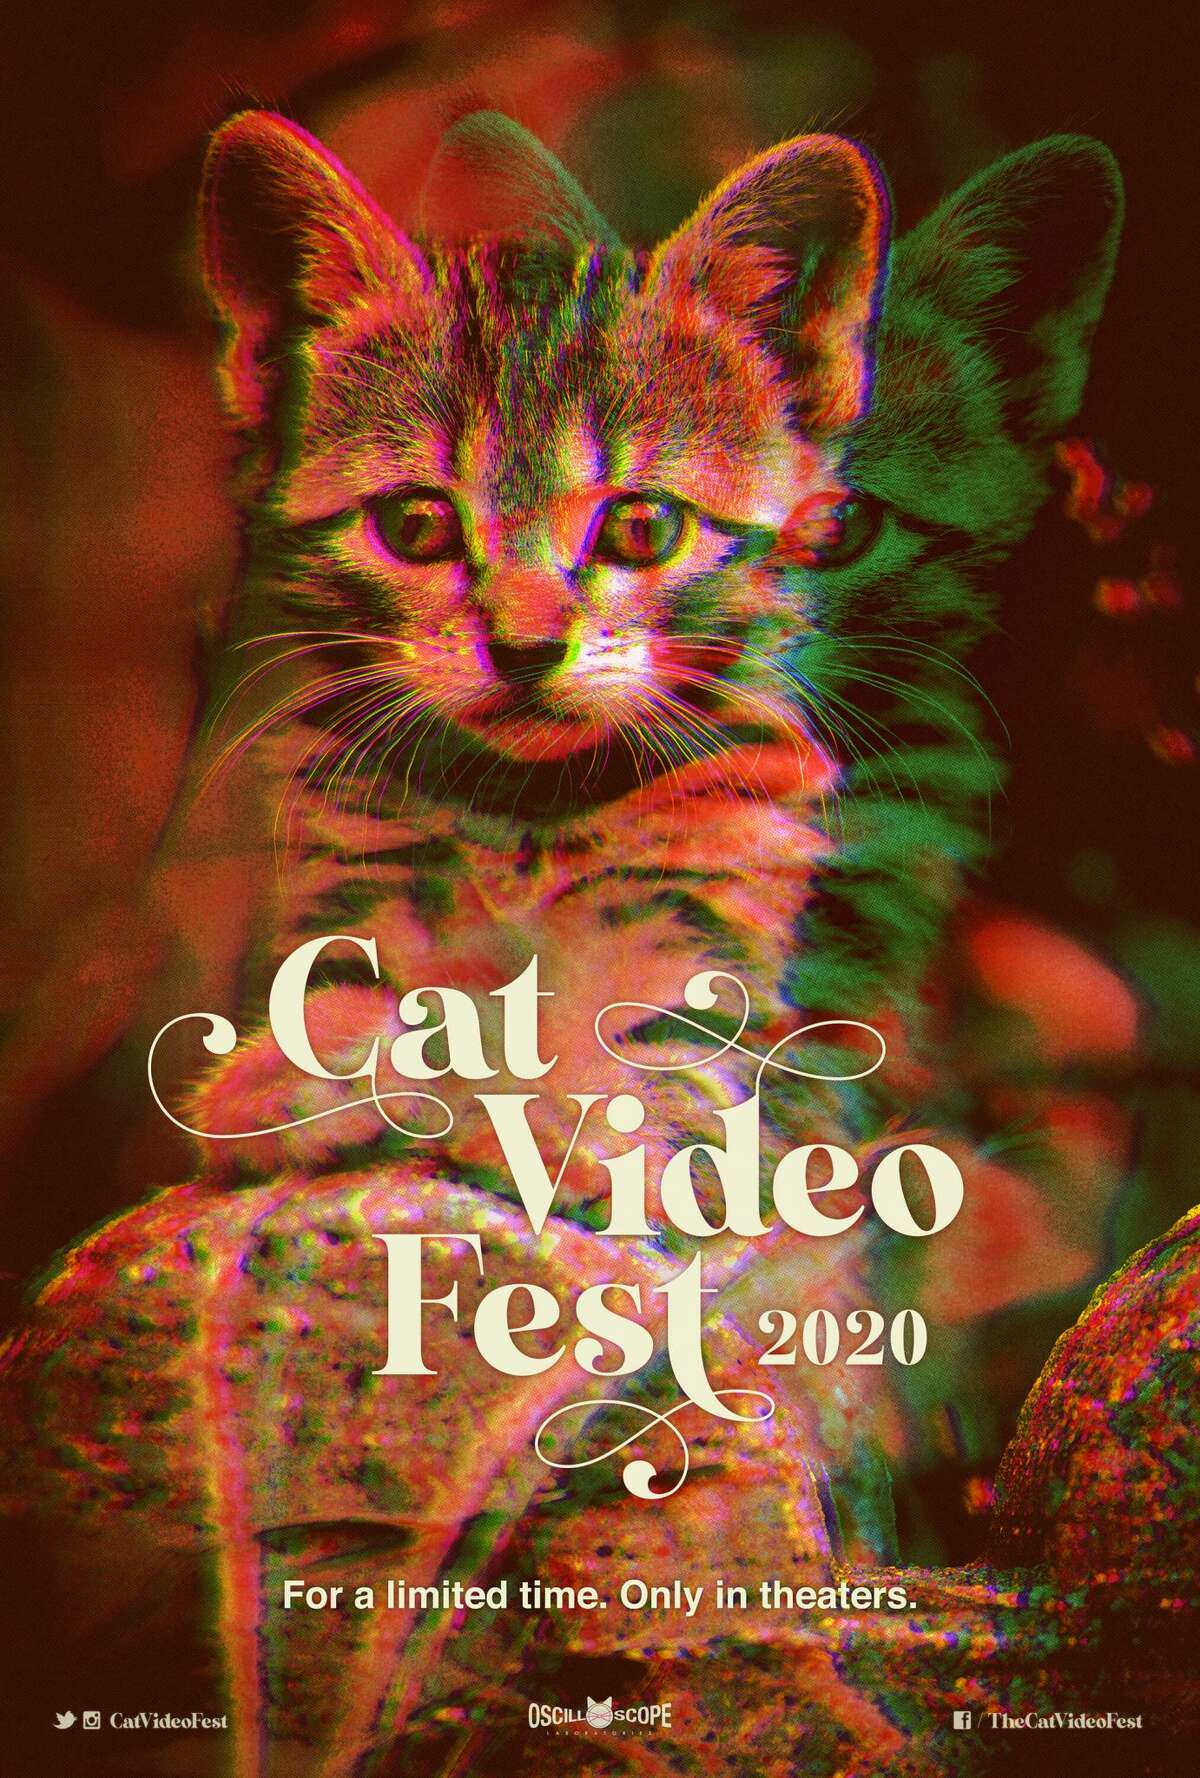 CatVideoFest2020 is coming to Stamford's Avon Theatre on Friday. Find out more.